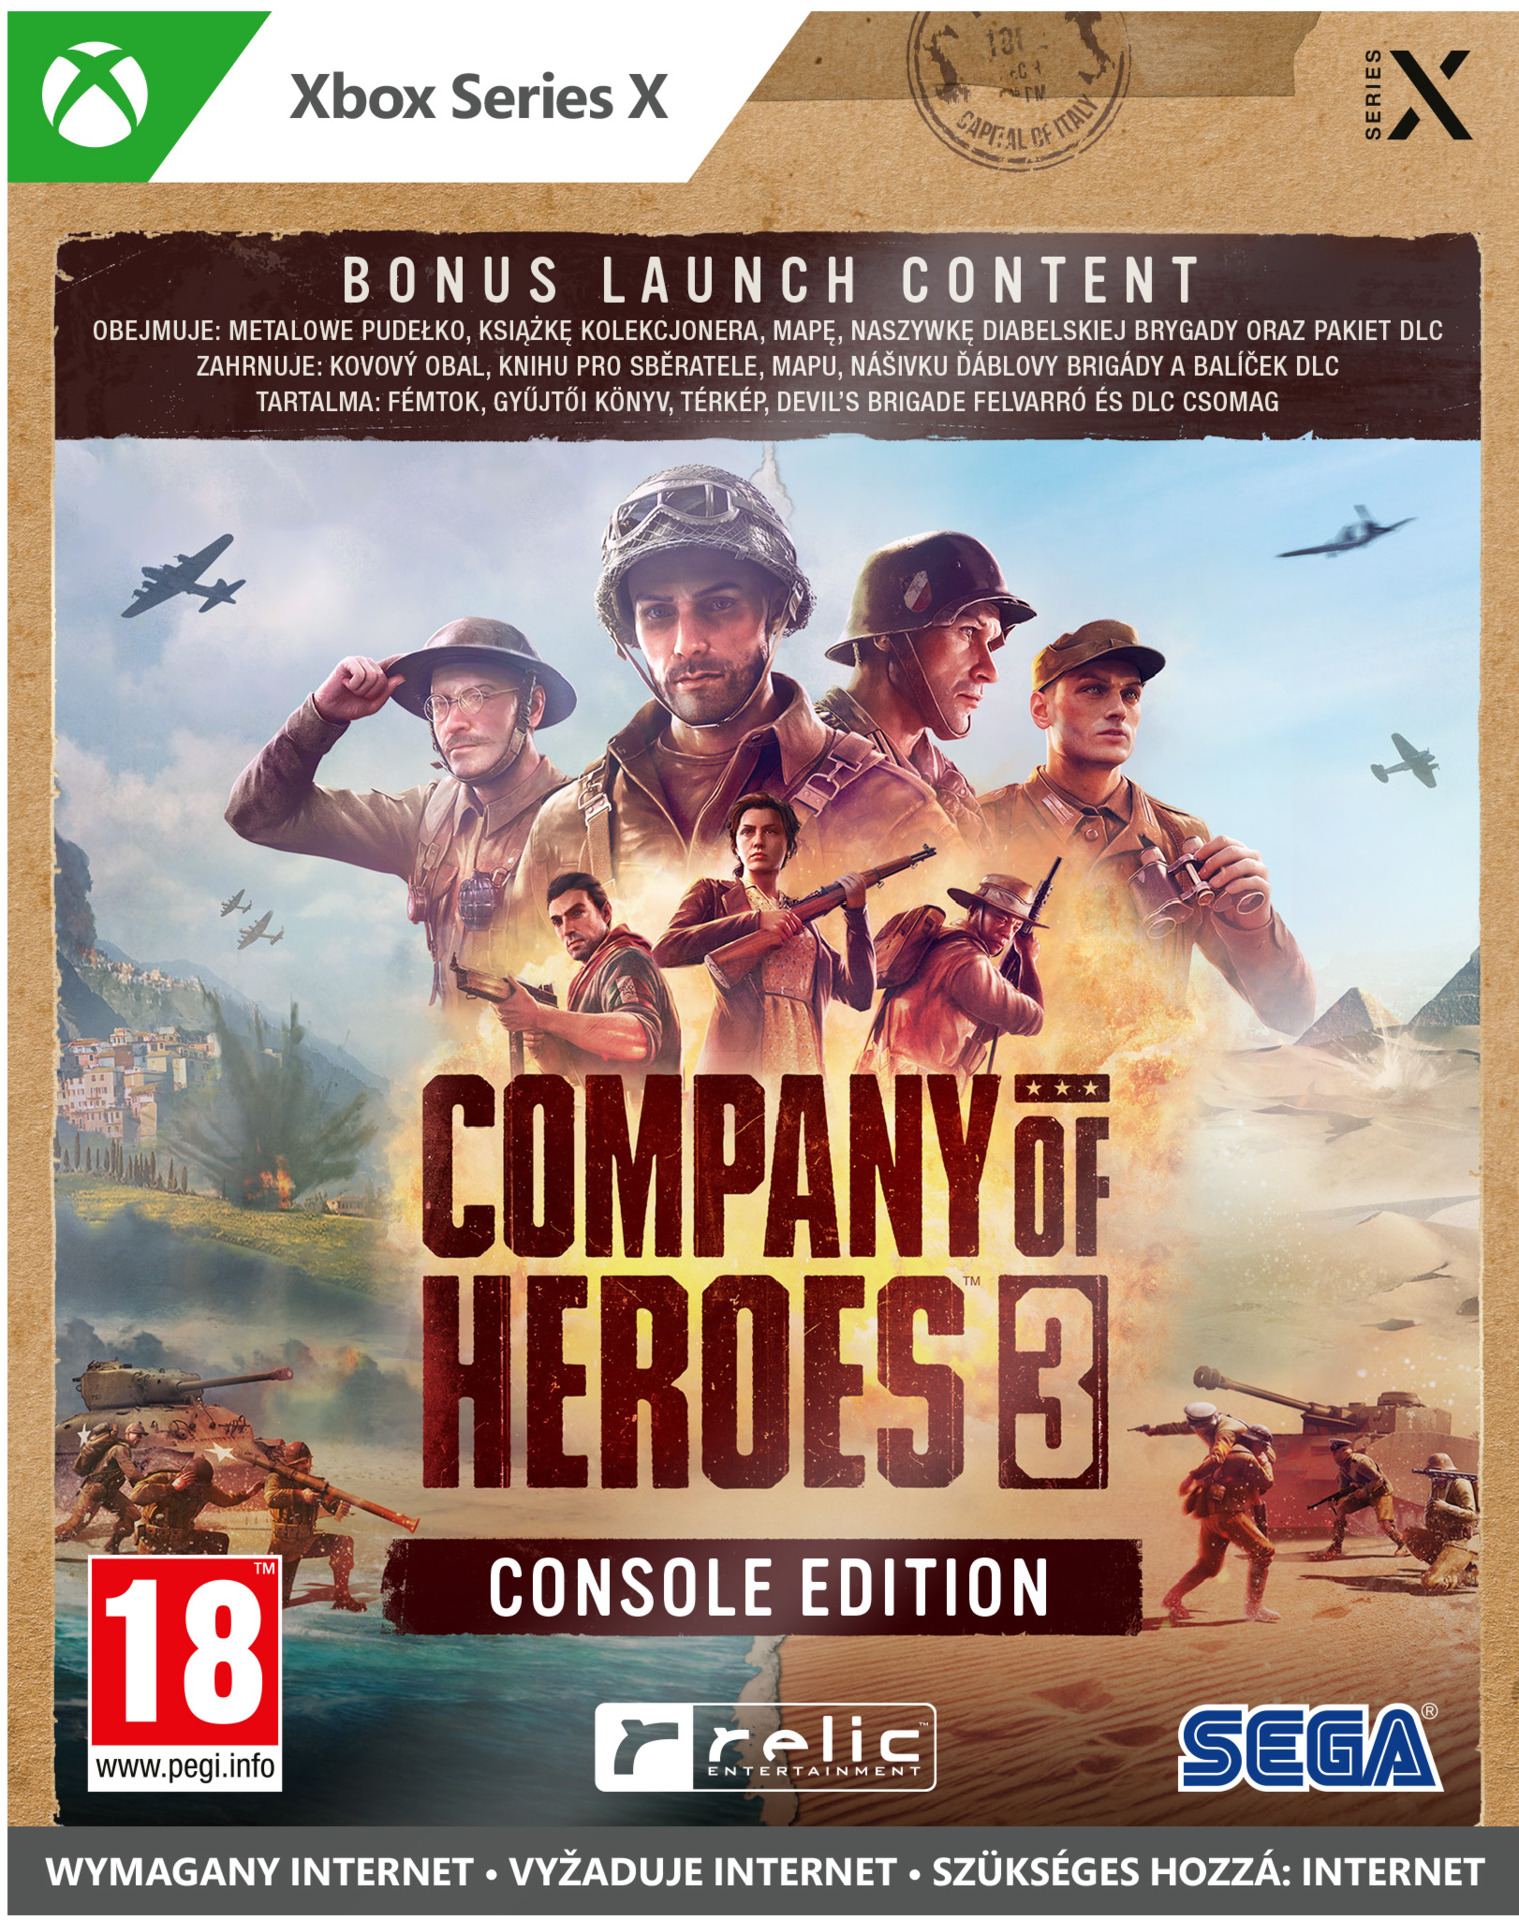 Company of Heroes 3 - Console Edition (XSX)